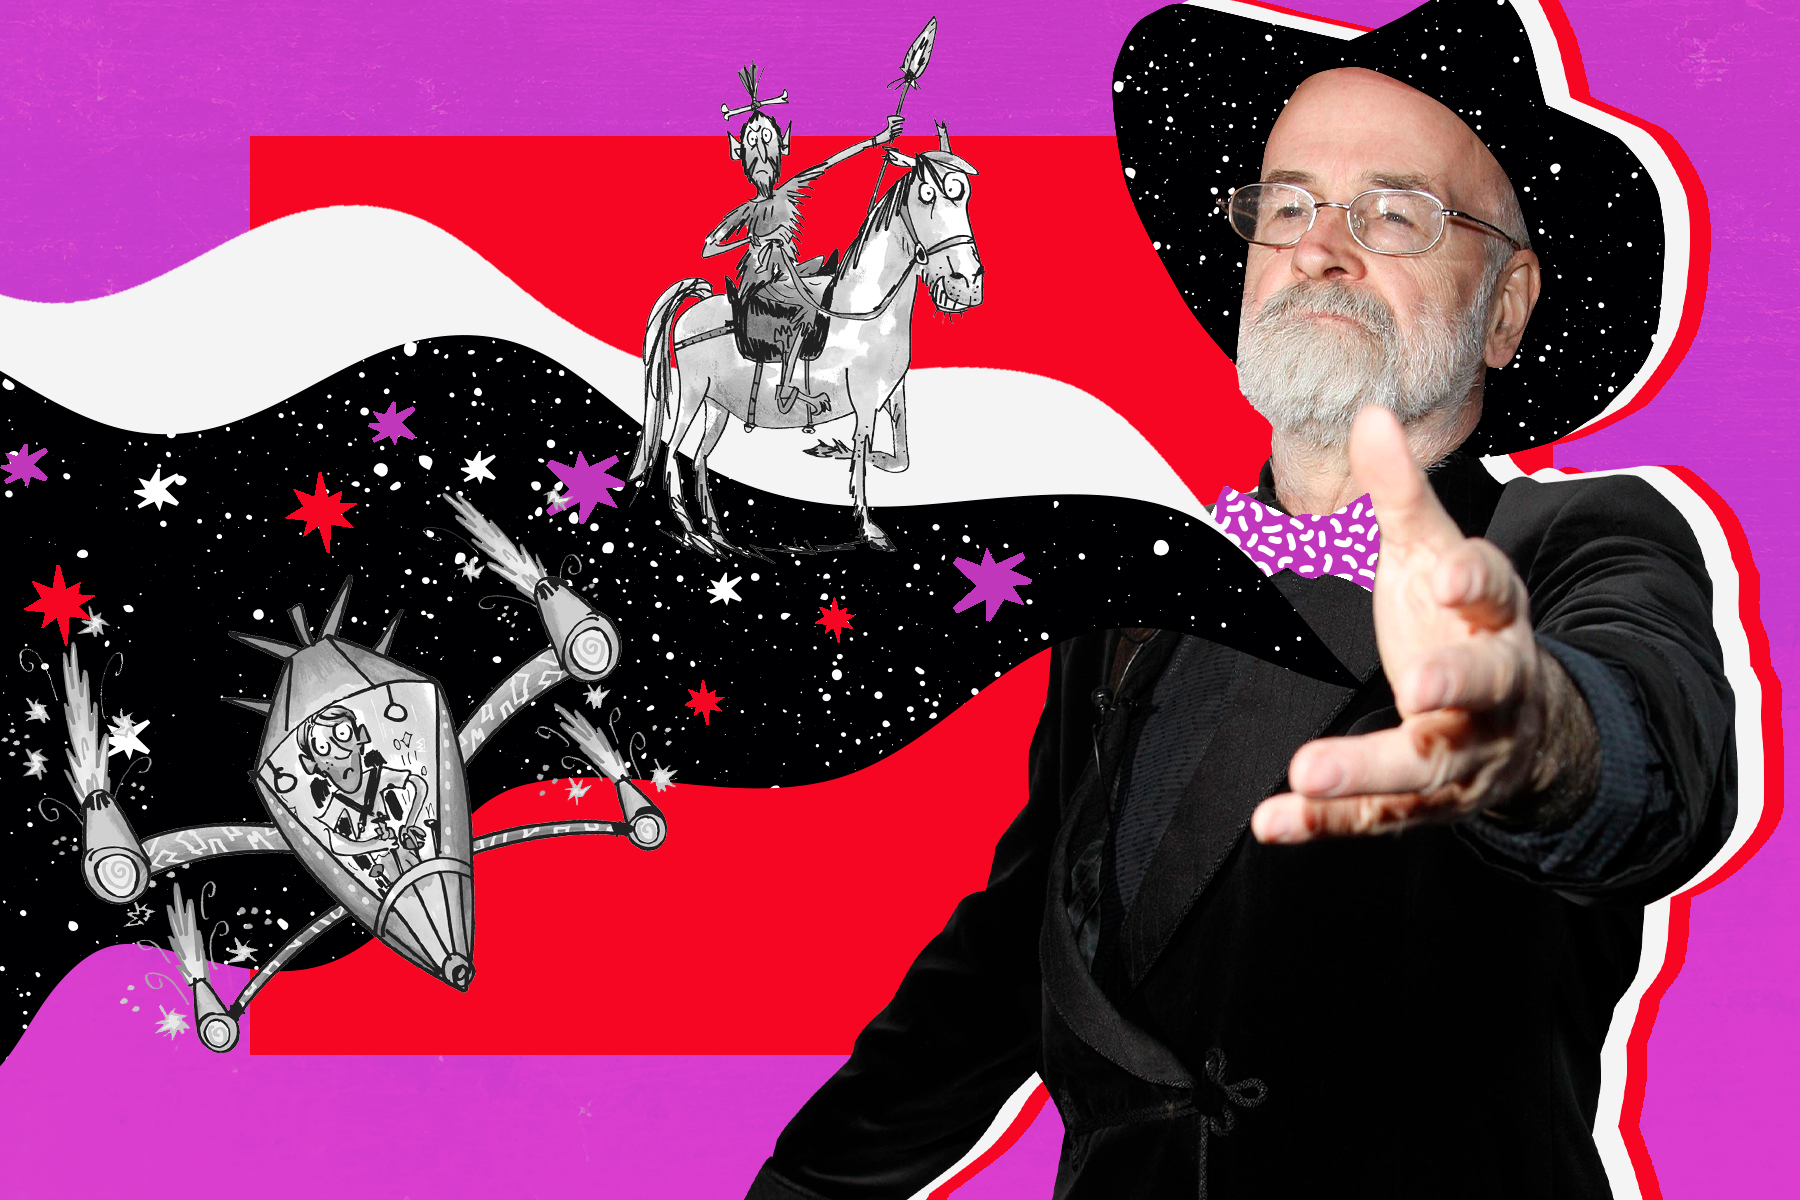 An image of the author Terry Pratchett, on a red and purple background, holding out his hand as though he is casting a spell and there are a couple of illustrations from his books riding the wave